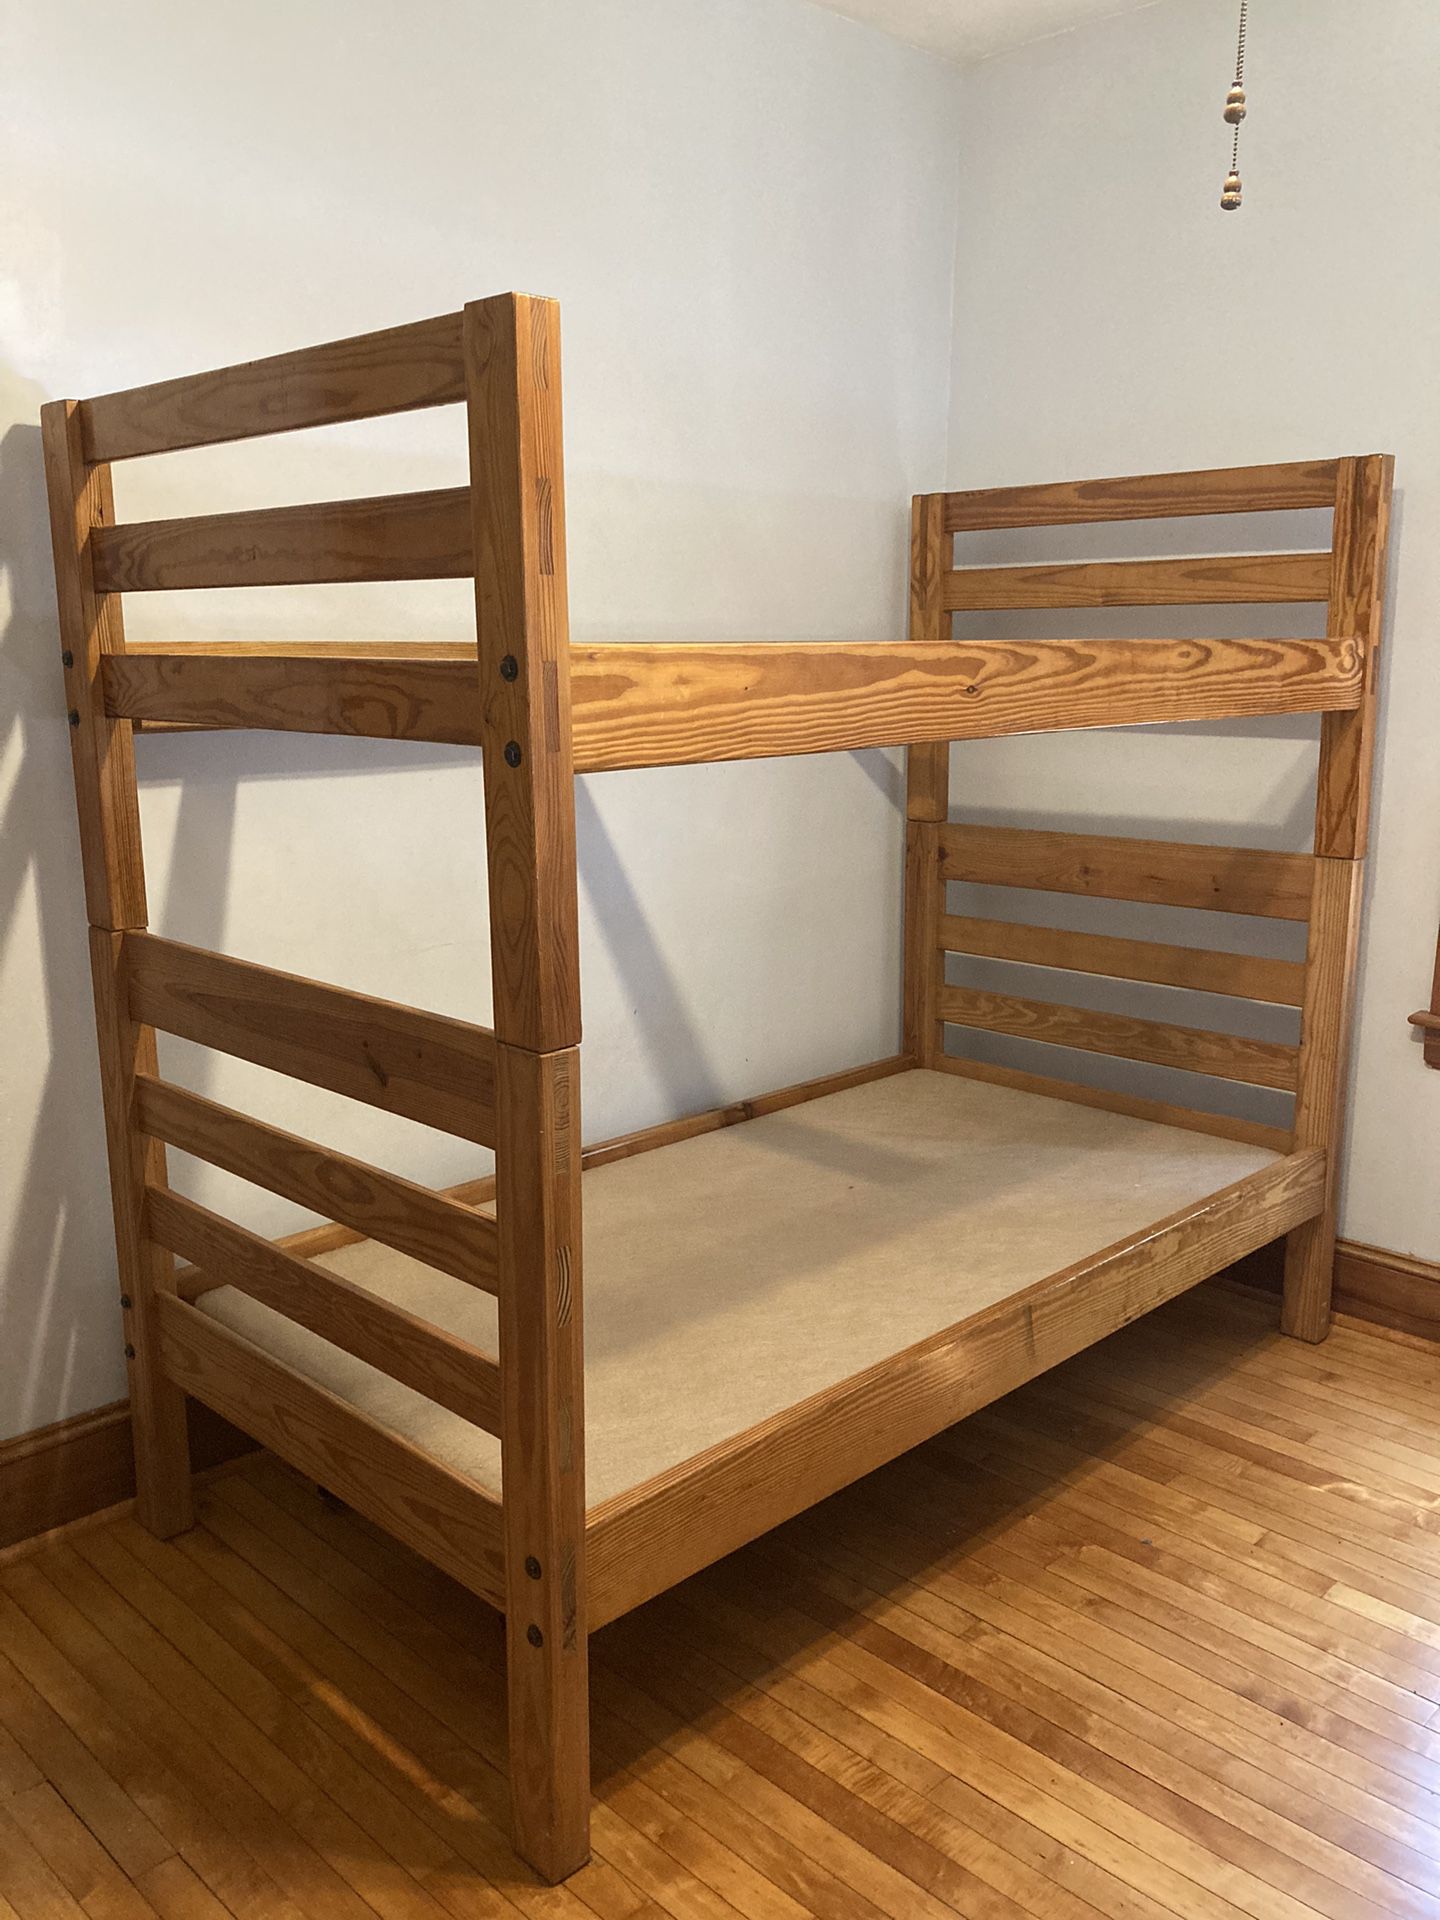 This End Up Bunk Bed